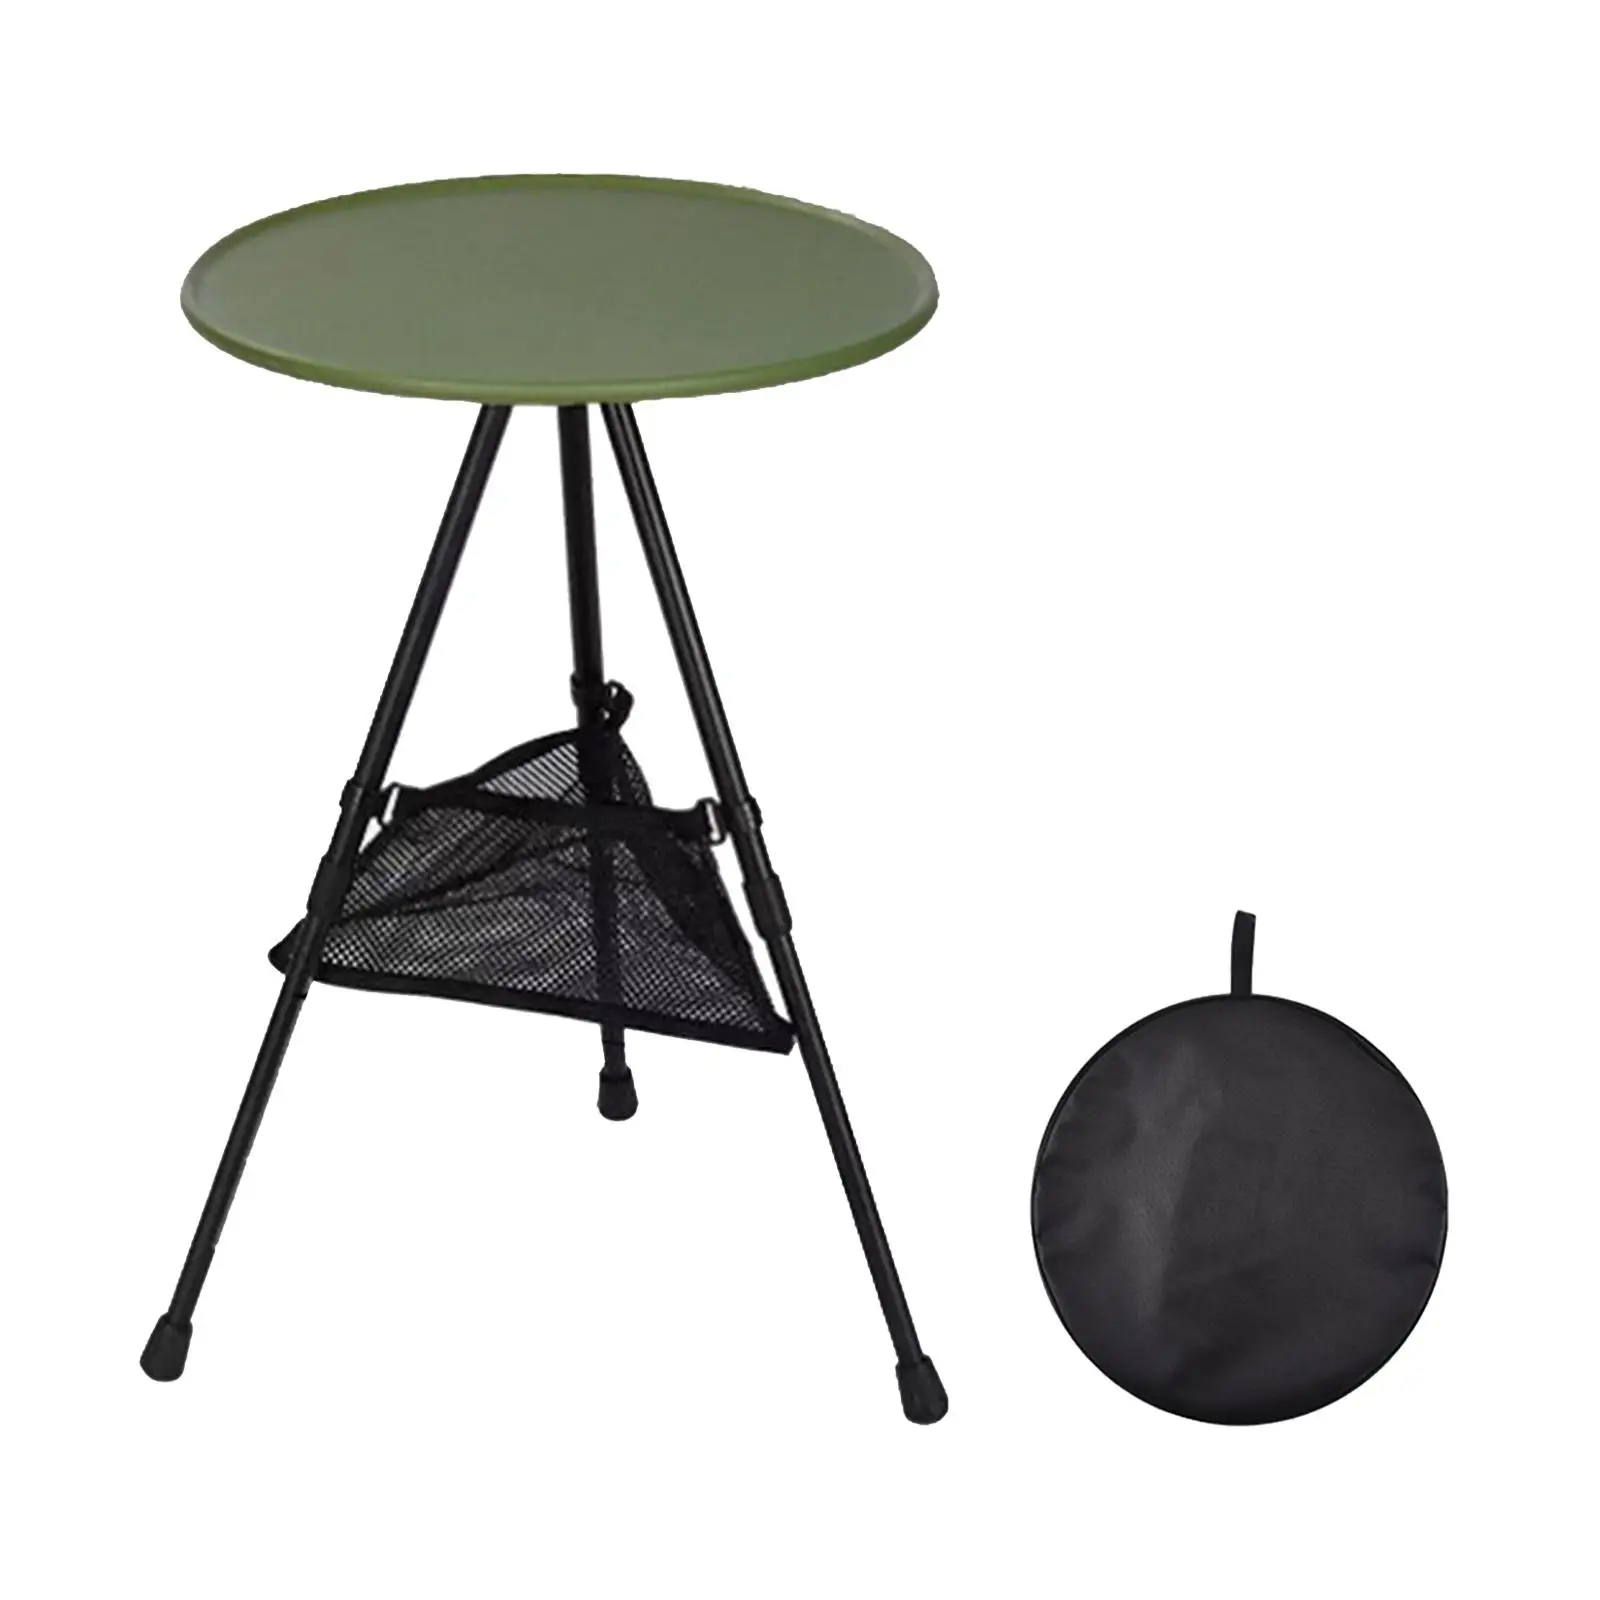 Outdoor Round Table Camping Table Coffee Tea Table Portable Compact Liftable Table Foldable Picnic Table for Yard Outdoor Beach